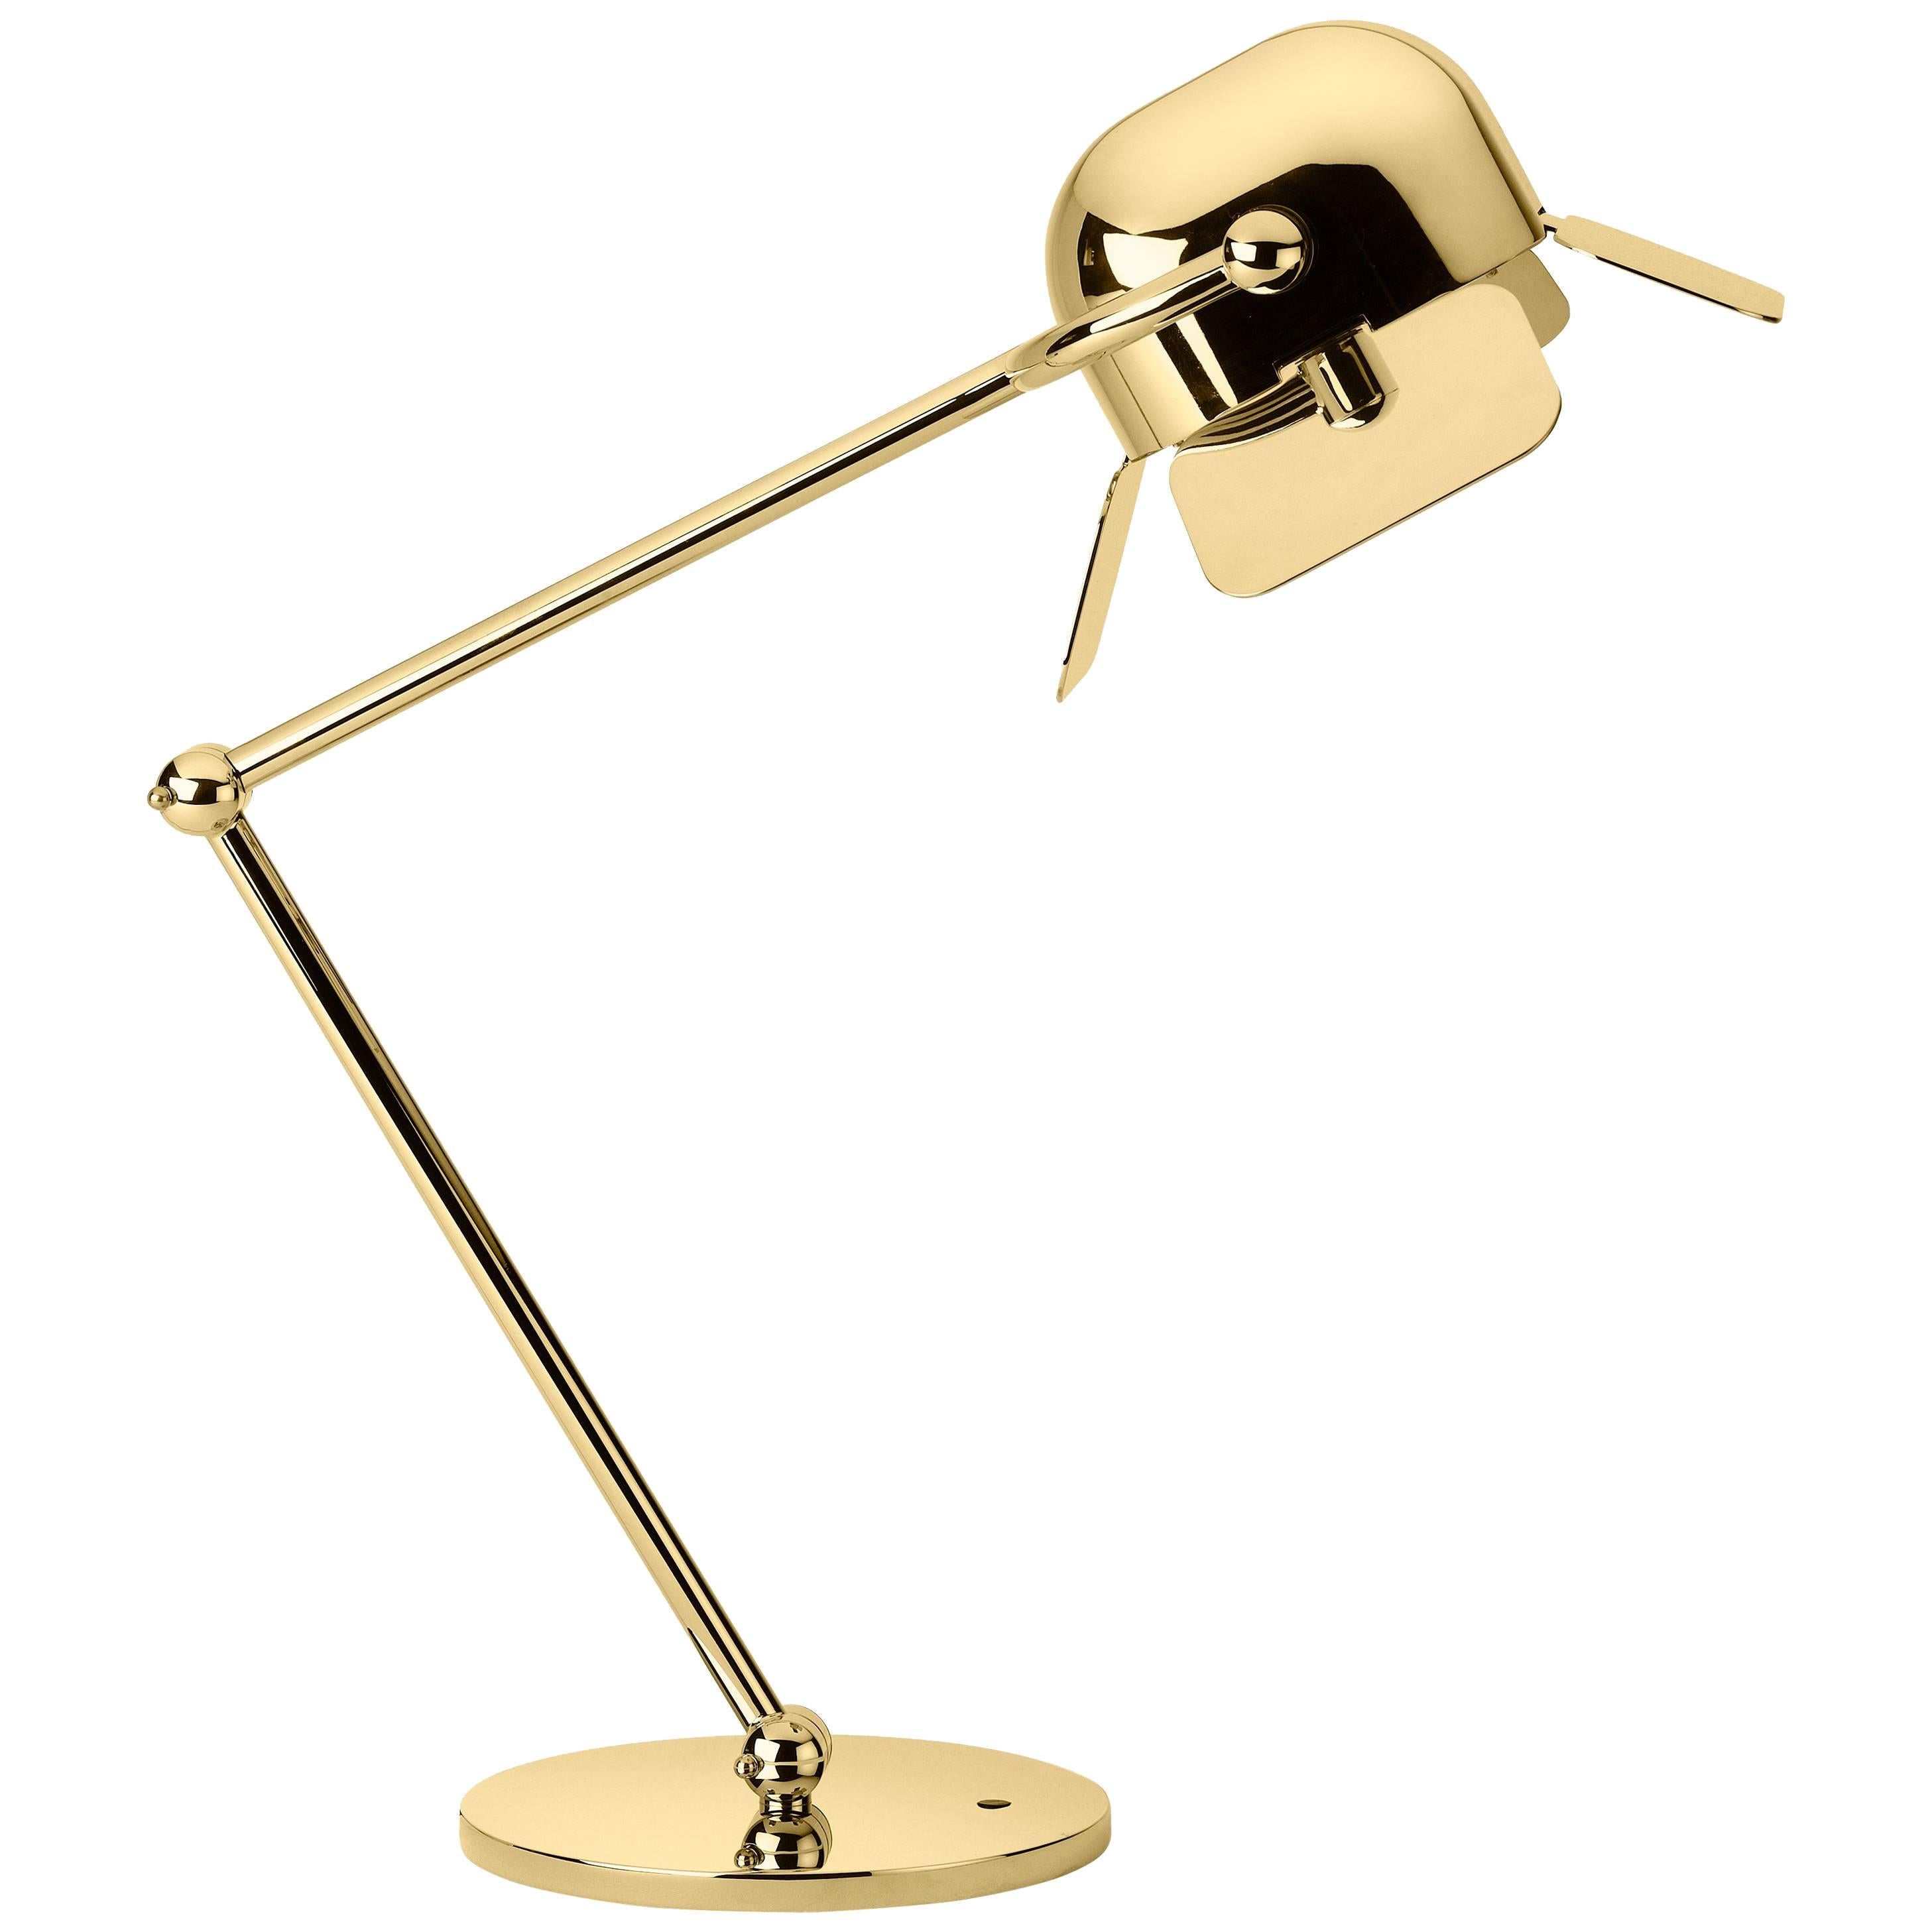 Ghidini 1961 Flamingo Table Lamp in Polished Gold Finish For Sale